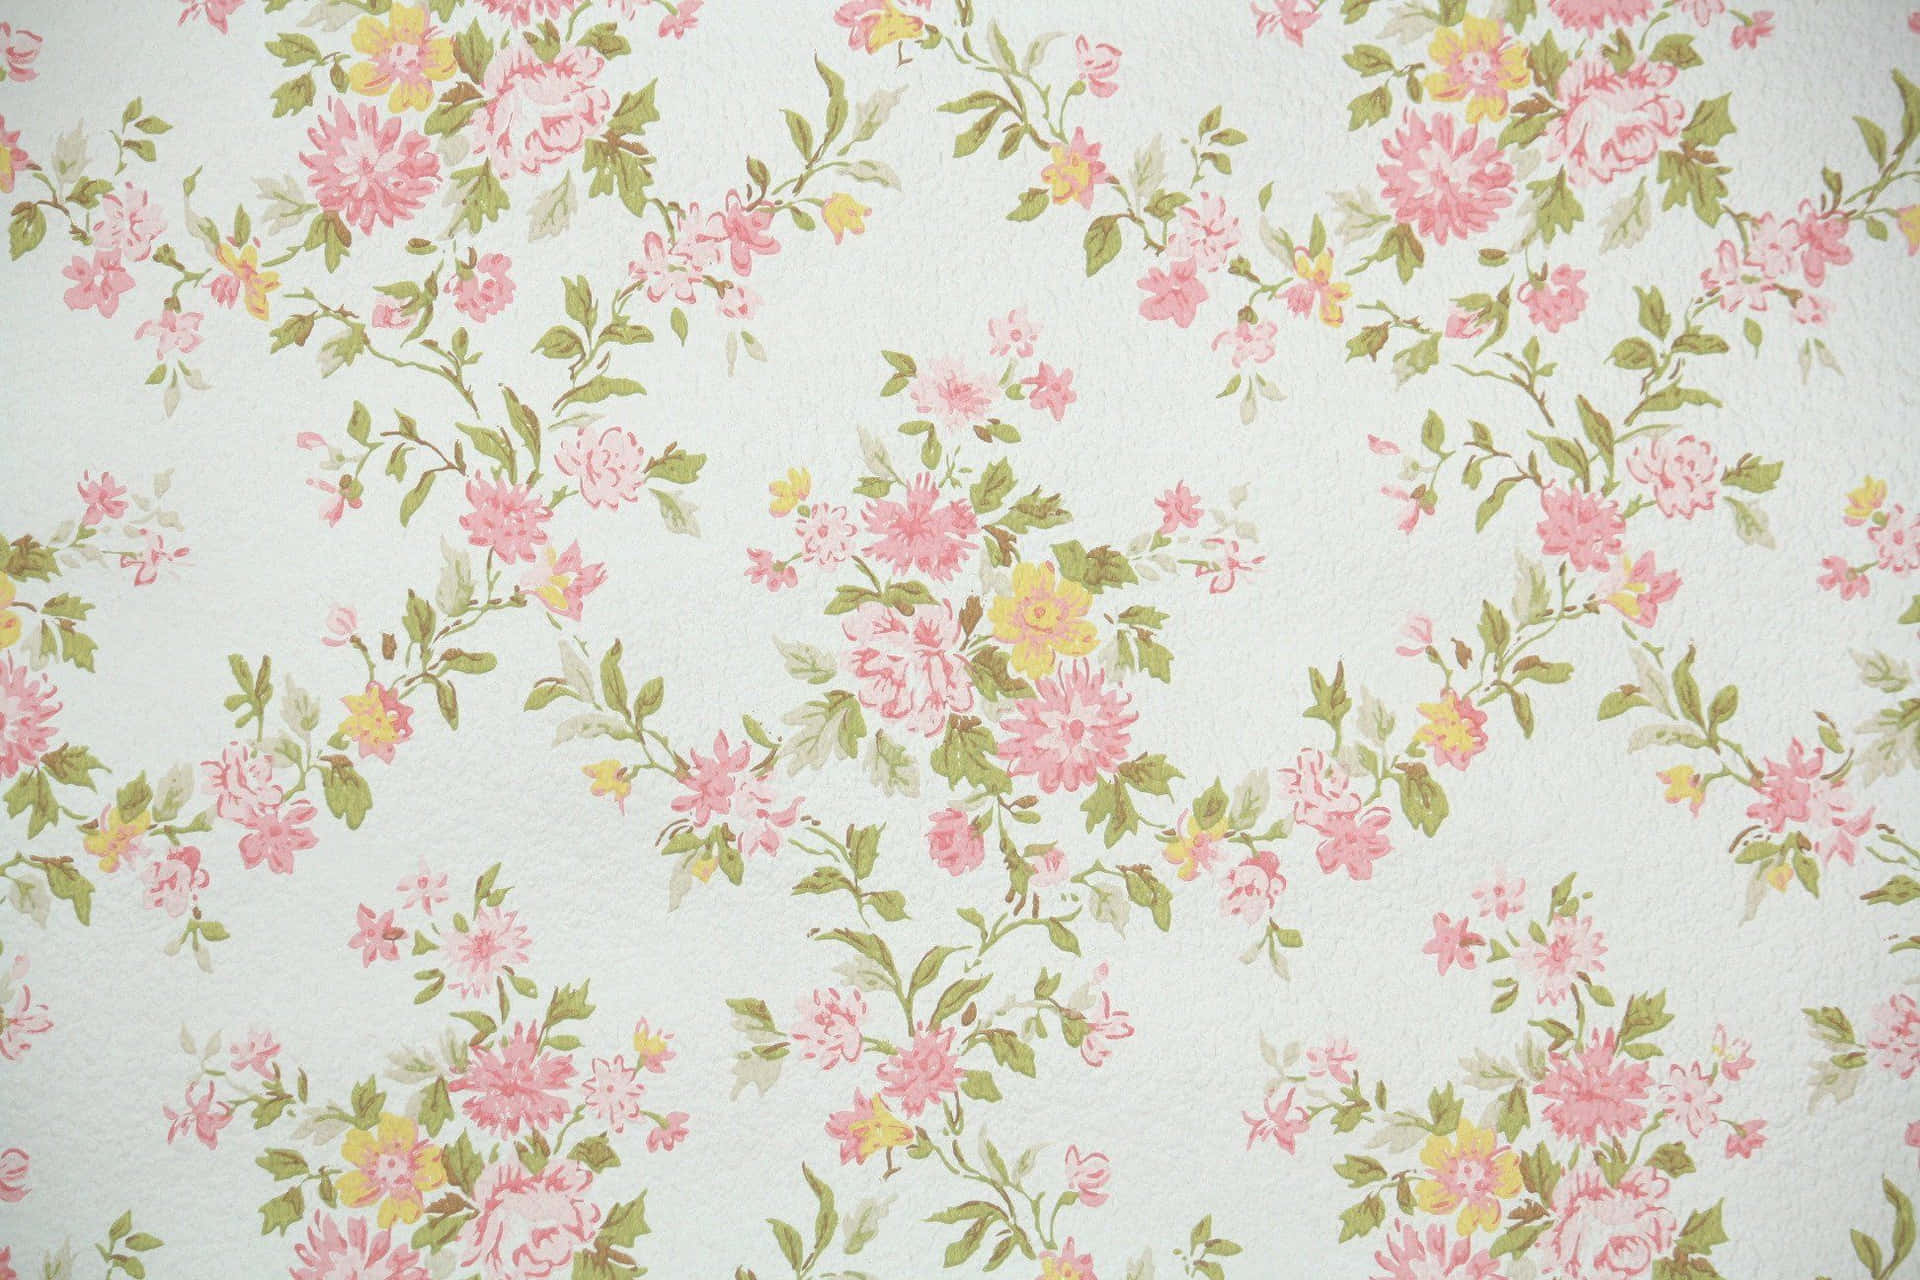 A Pink And Yellow Floral Wallpaper